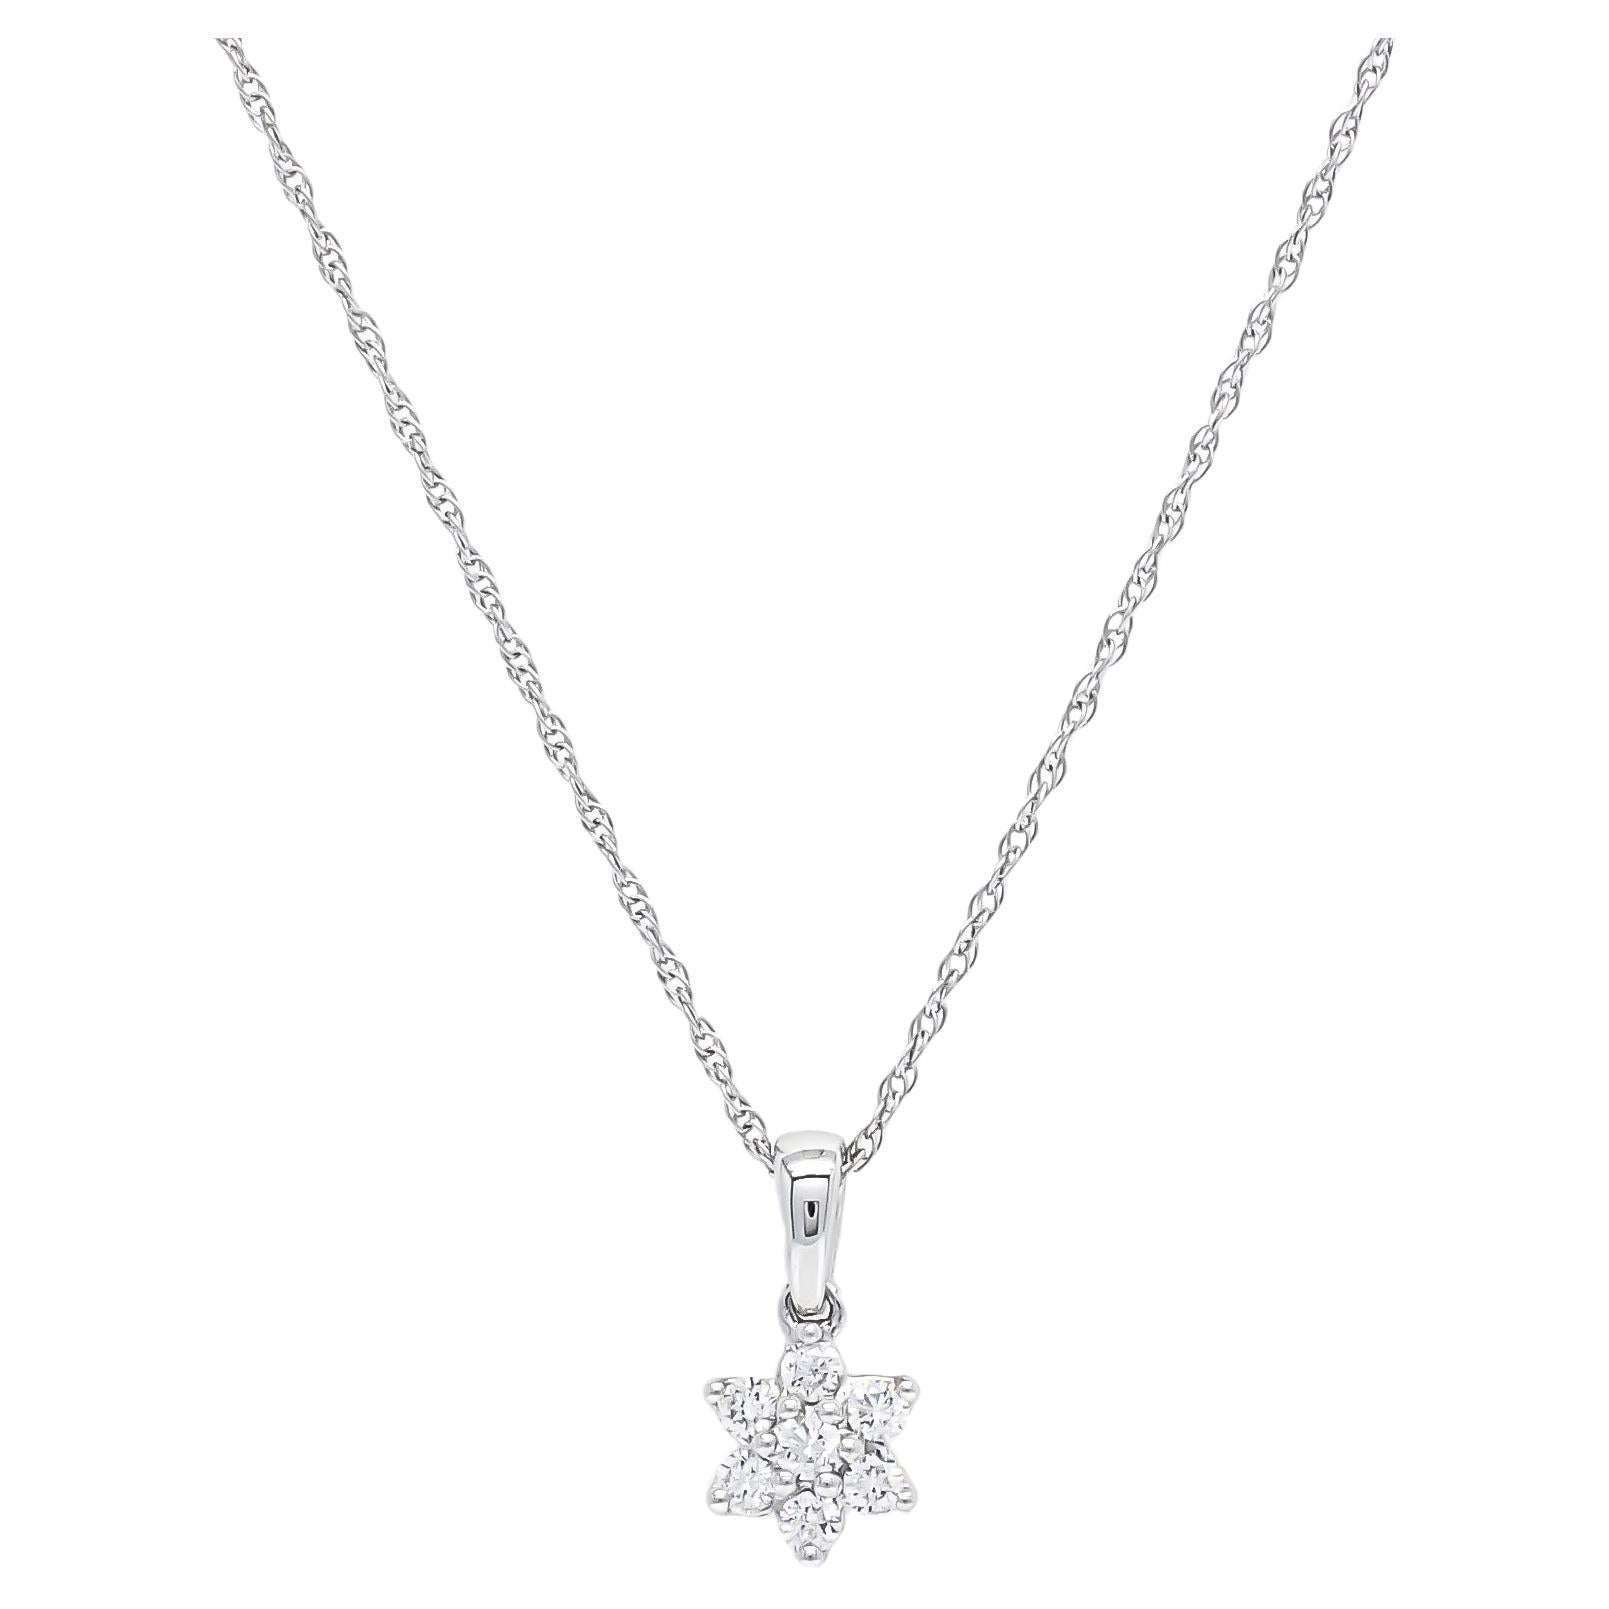 Natural Diamond 0.16 carats 18KT White Gold Flower Pendant Chain Necklace For Sale